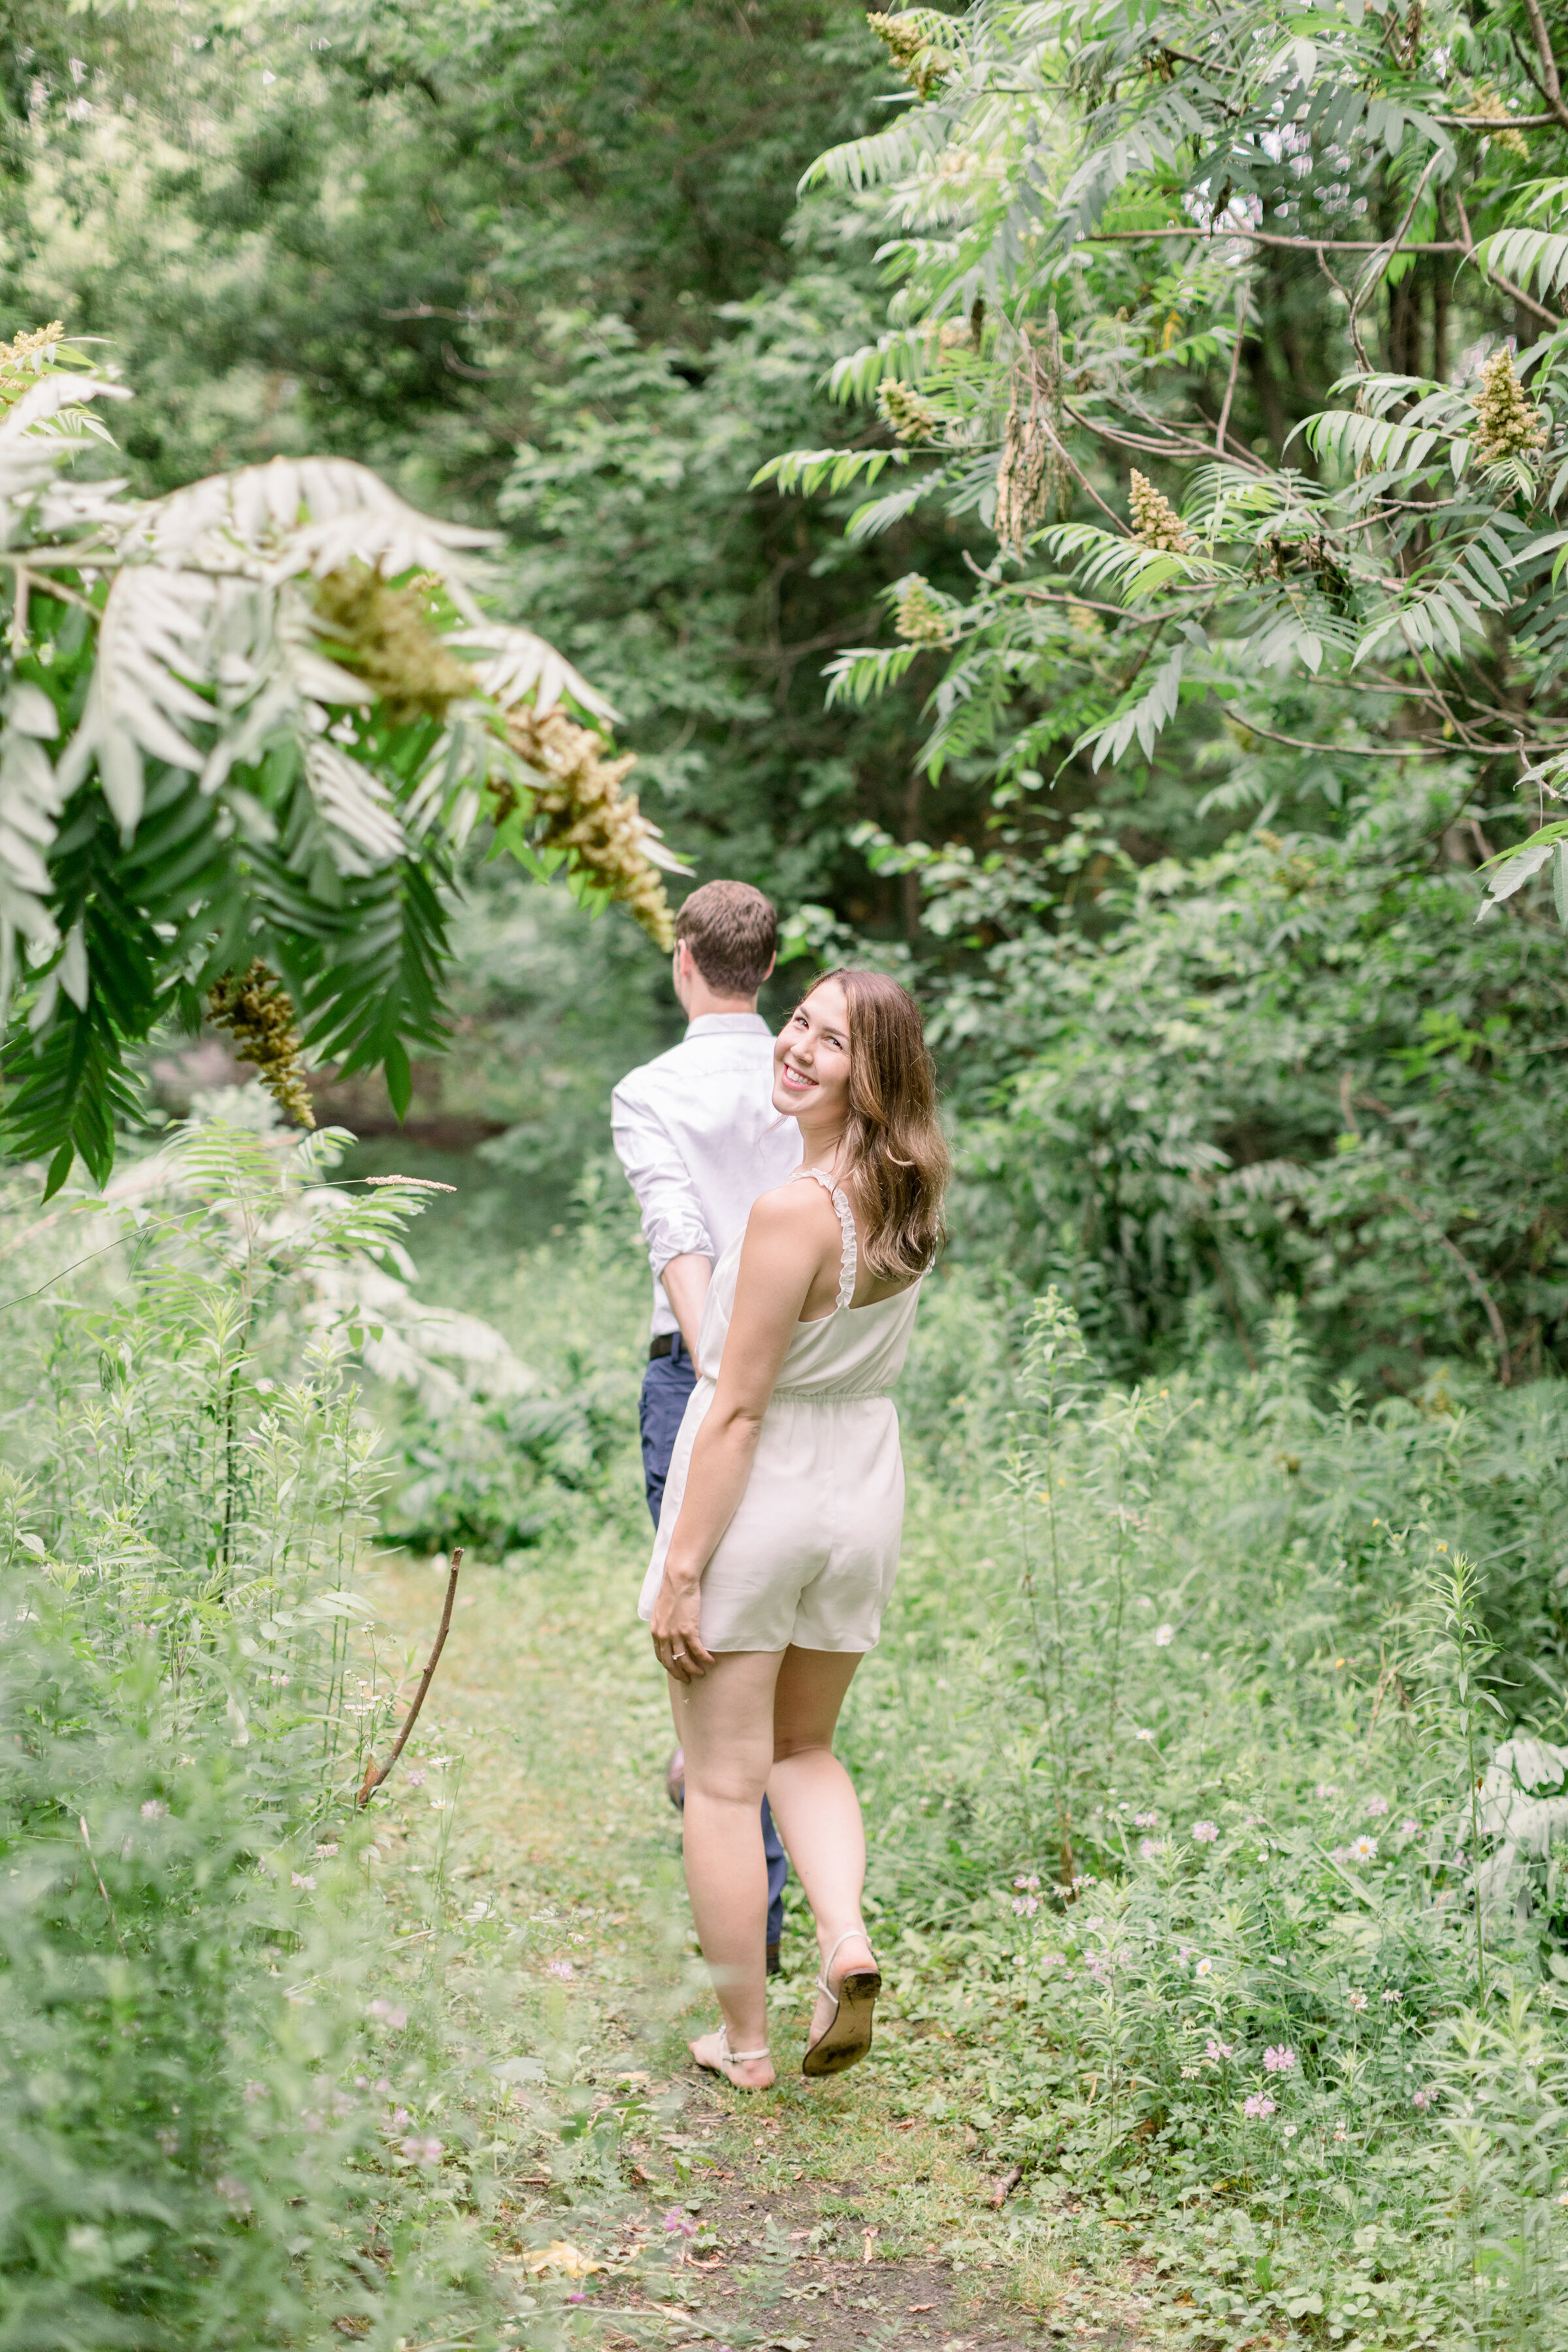  Beautiful lush green outdoor engagement photographer location with nature trail by Chelsea Mason Photography in Ottawa, ON. locations for photoshoots summer photoshoots outdoor nature locations for engagements best places to take engagements in otta